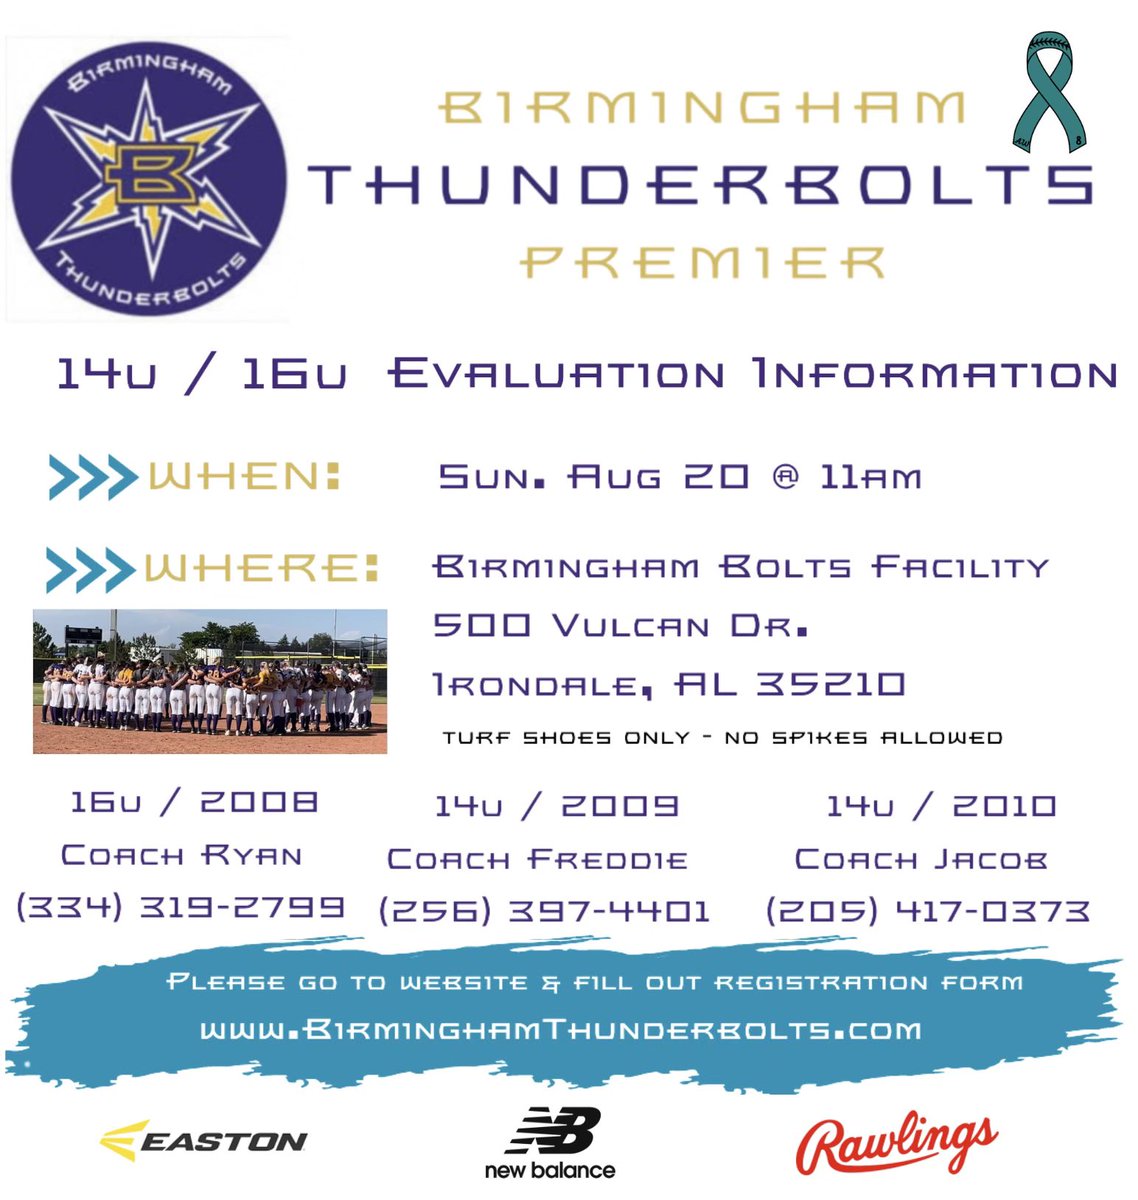 Reminder 👉 Aug 20th at 11AM. @BoltsOrg evalation. Don’t assume about what the organization has to offer your daughter or how she fits into the Bolts🧩. Come learn and ask questions. It is truly a special & unique offering in the softball community. #BuiltByRock #BoltsBoom